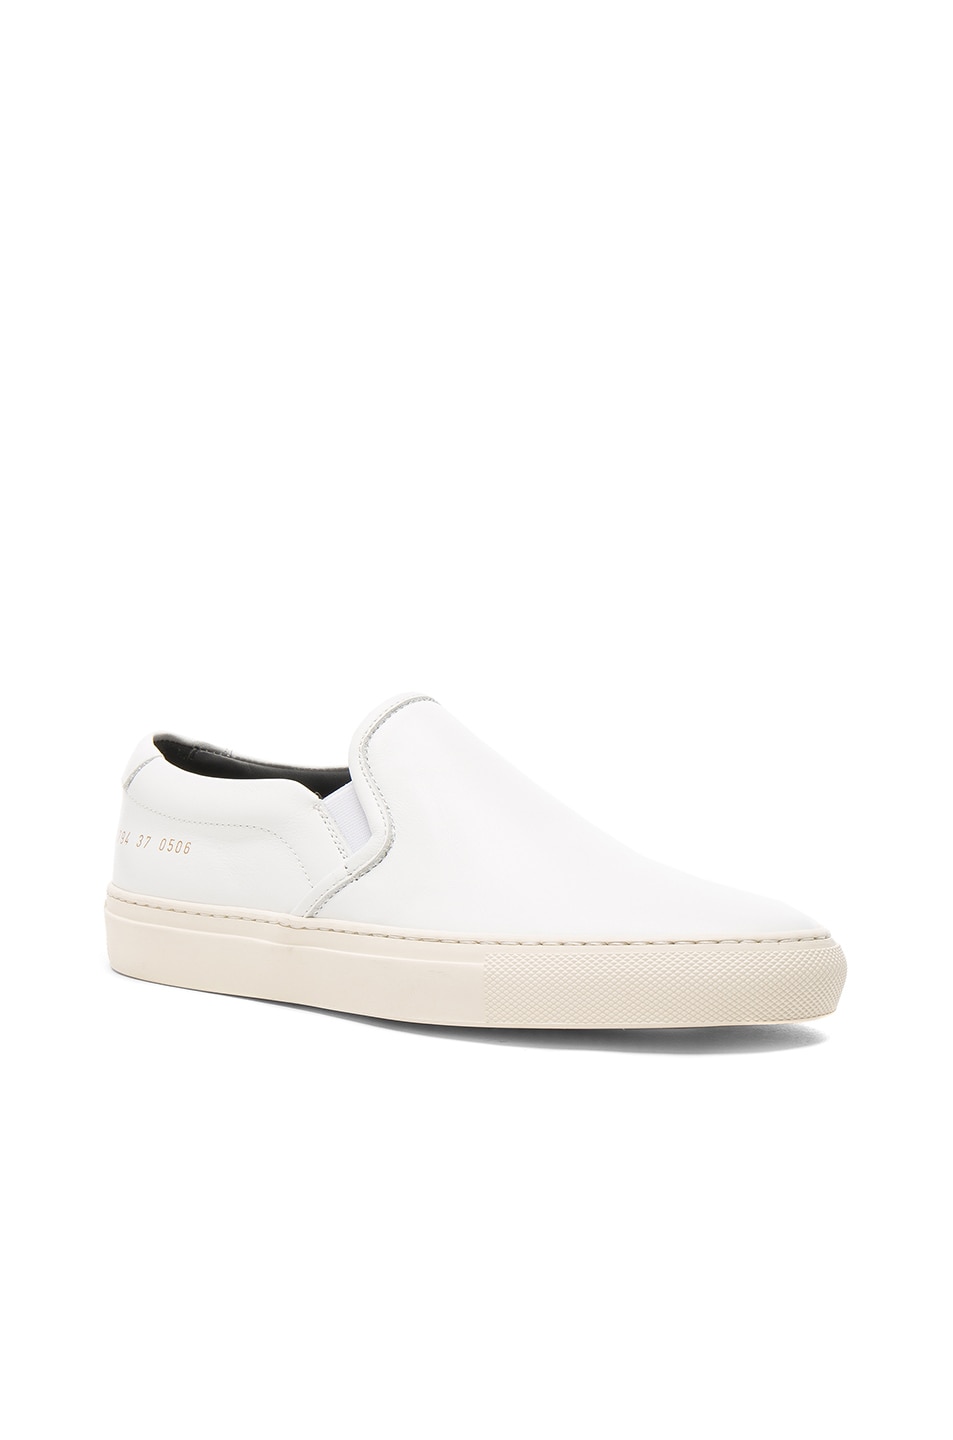 common projects leather slip on